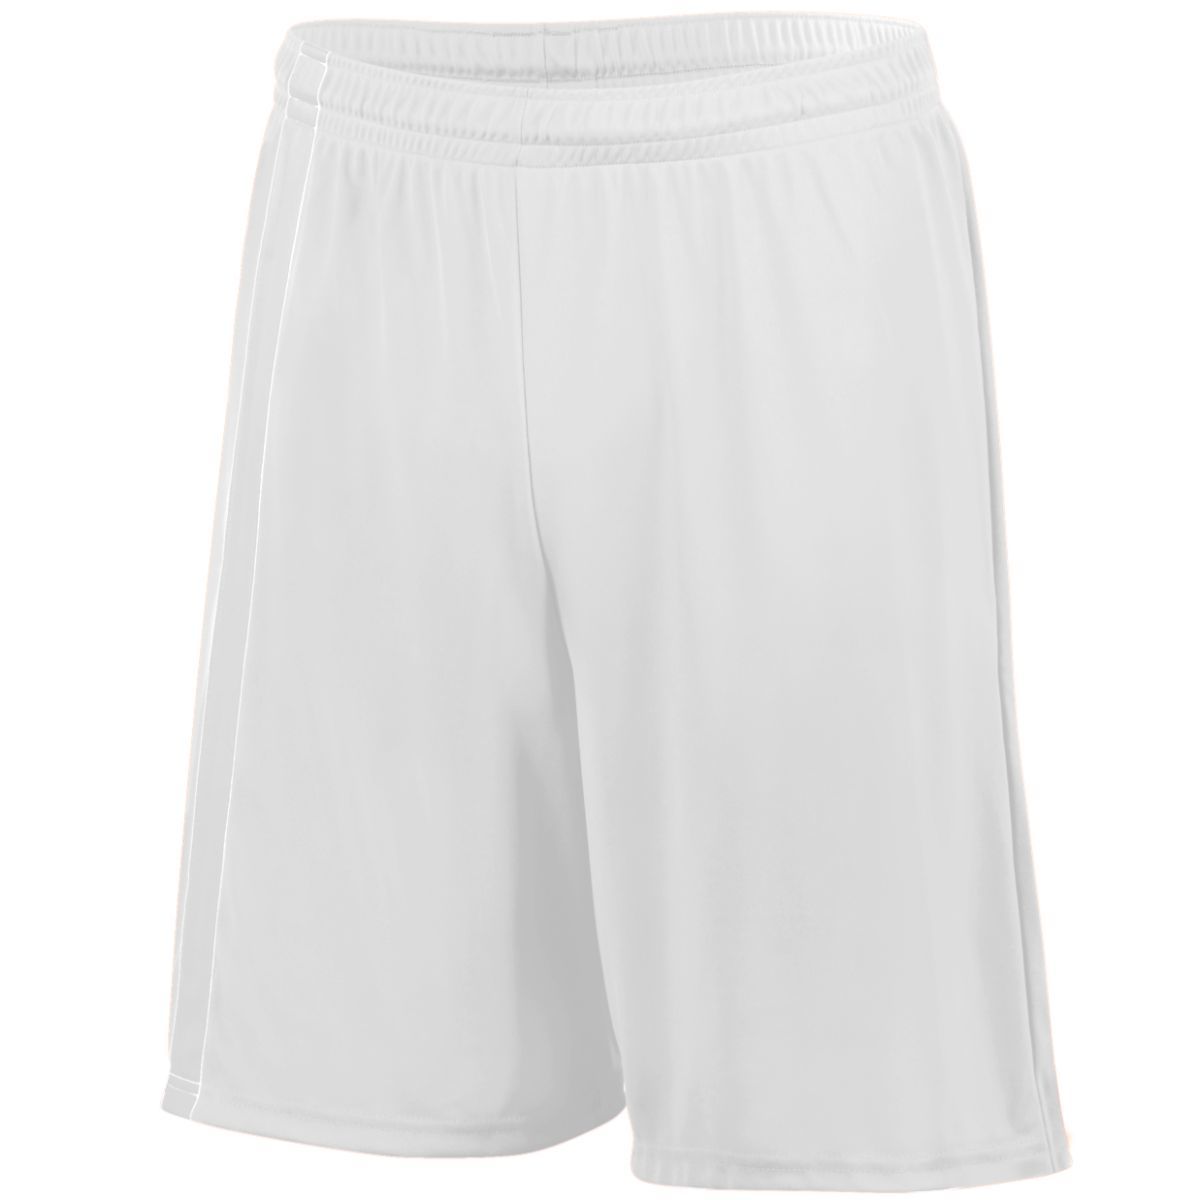 Augusta Sportswear Attacking Third Shorts in White/White  -Part of the Adult, Adult-Shorts, Augusta-Products, Soccer, All-Sports-1 product lines at KanaleyCreations.com